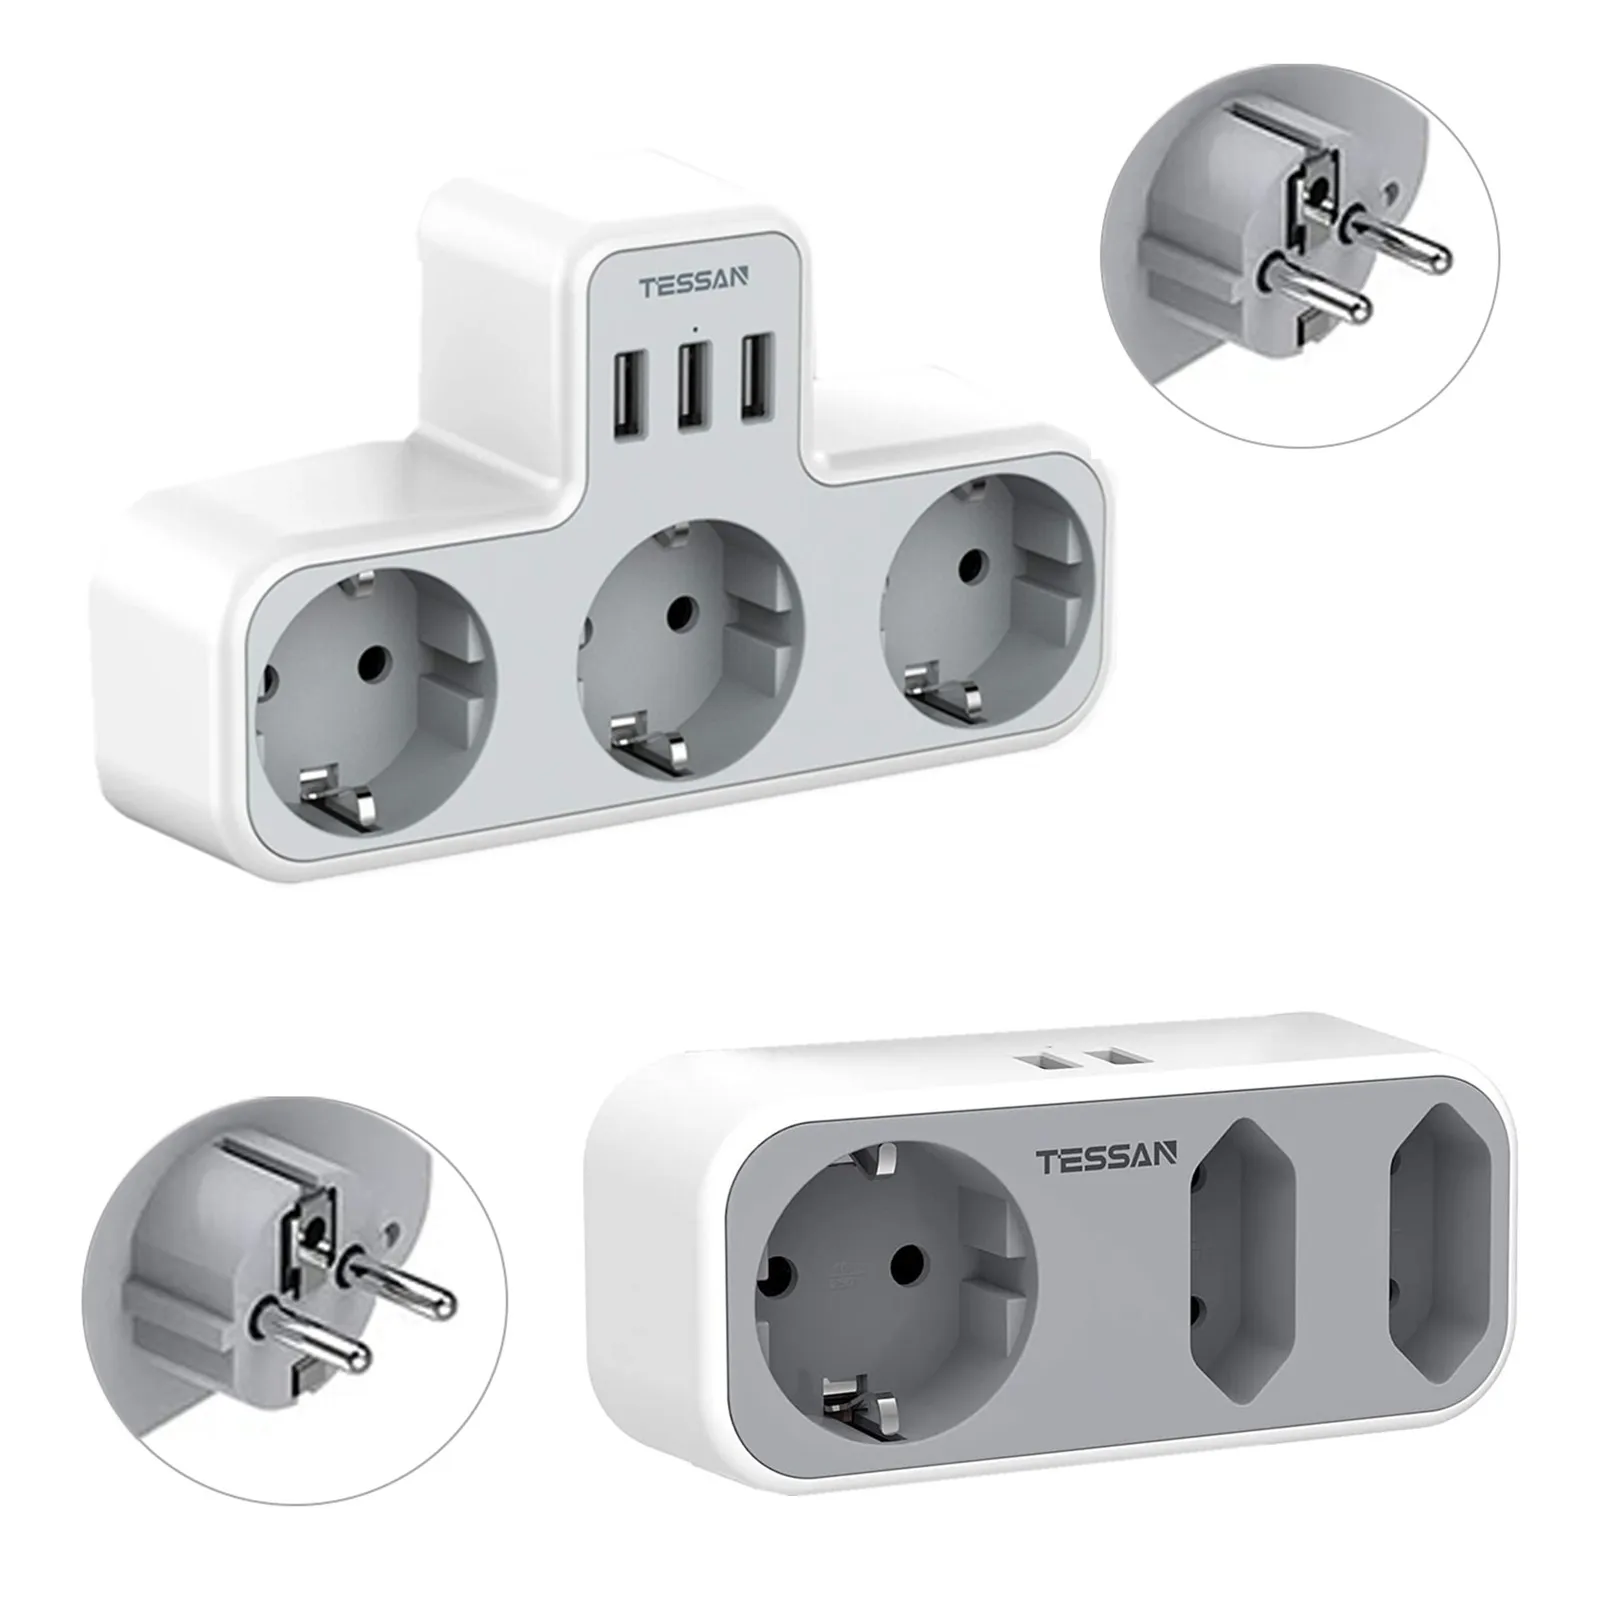 

TESSAN Compact Power Strip with 5V/2.4A USB Ports and 3 European Outlets Electrical Plug Extension Socket 110~250V 3600W